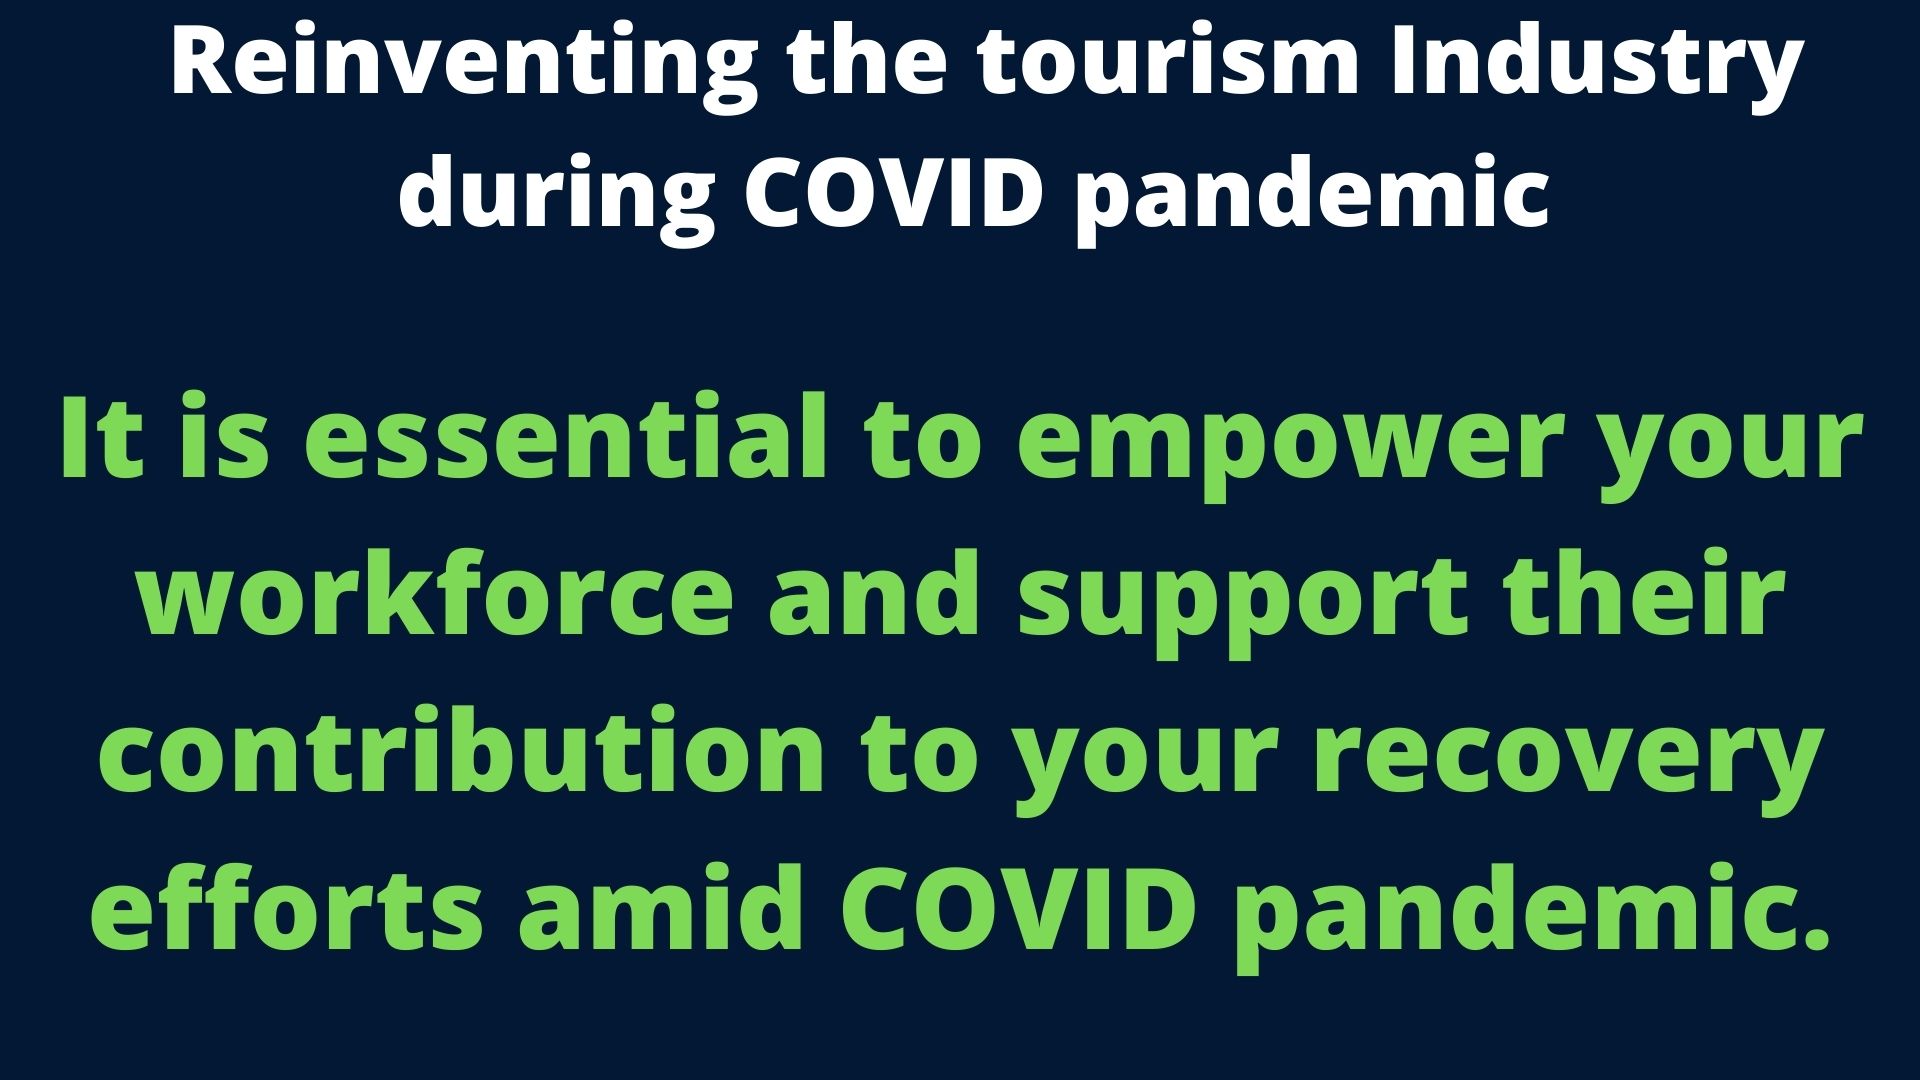 How To Reinvent The Tourism Industry During COVID Pandemic